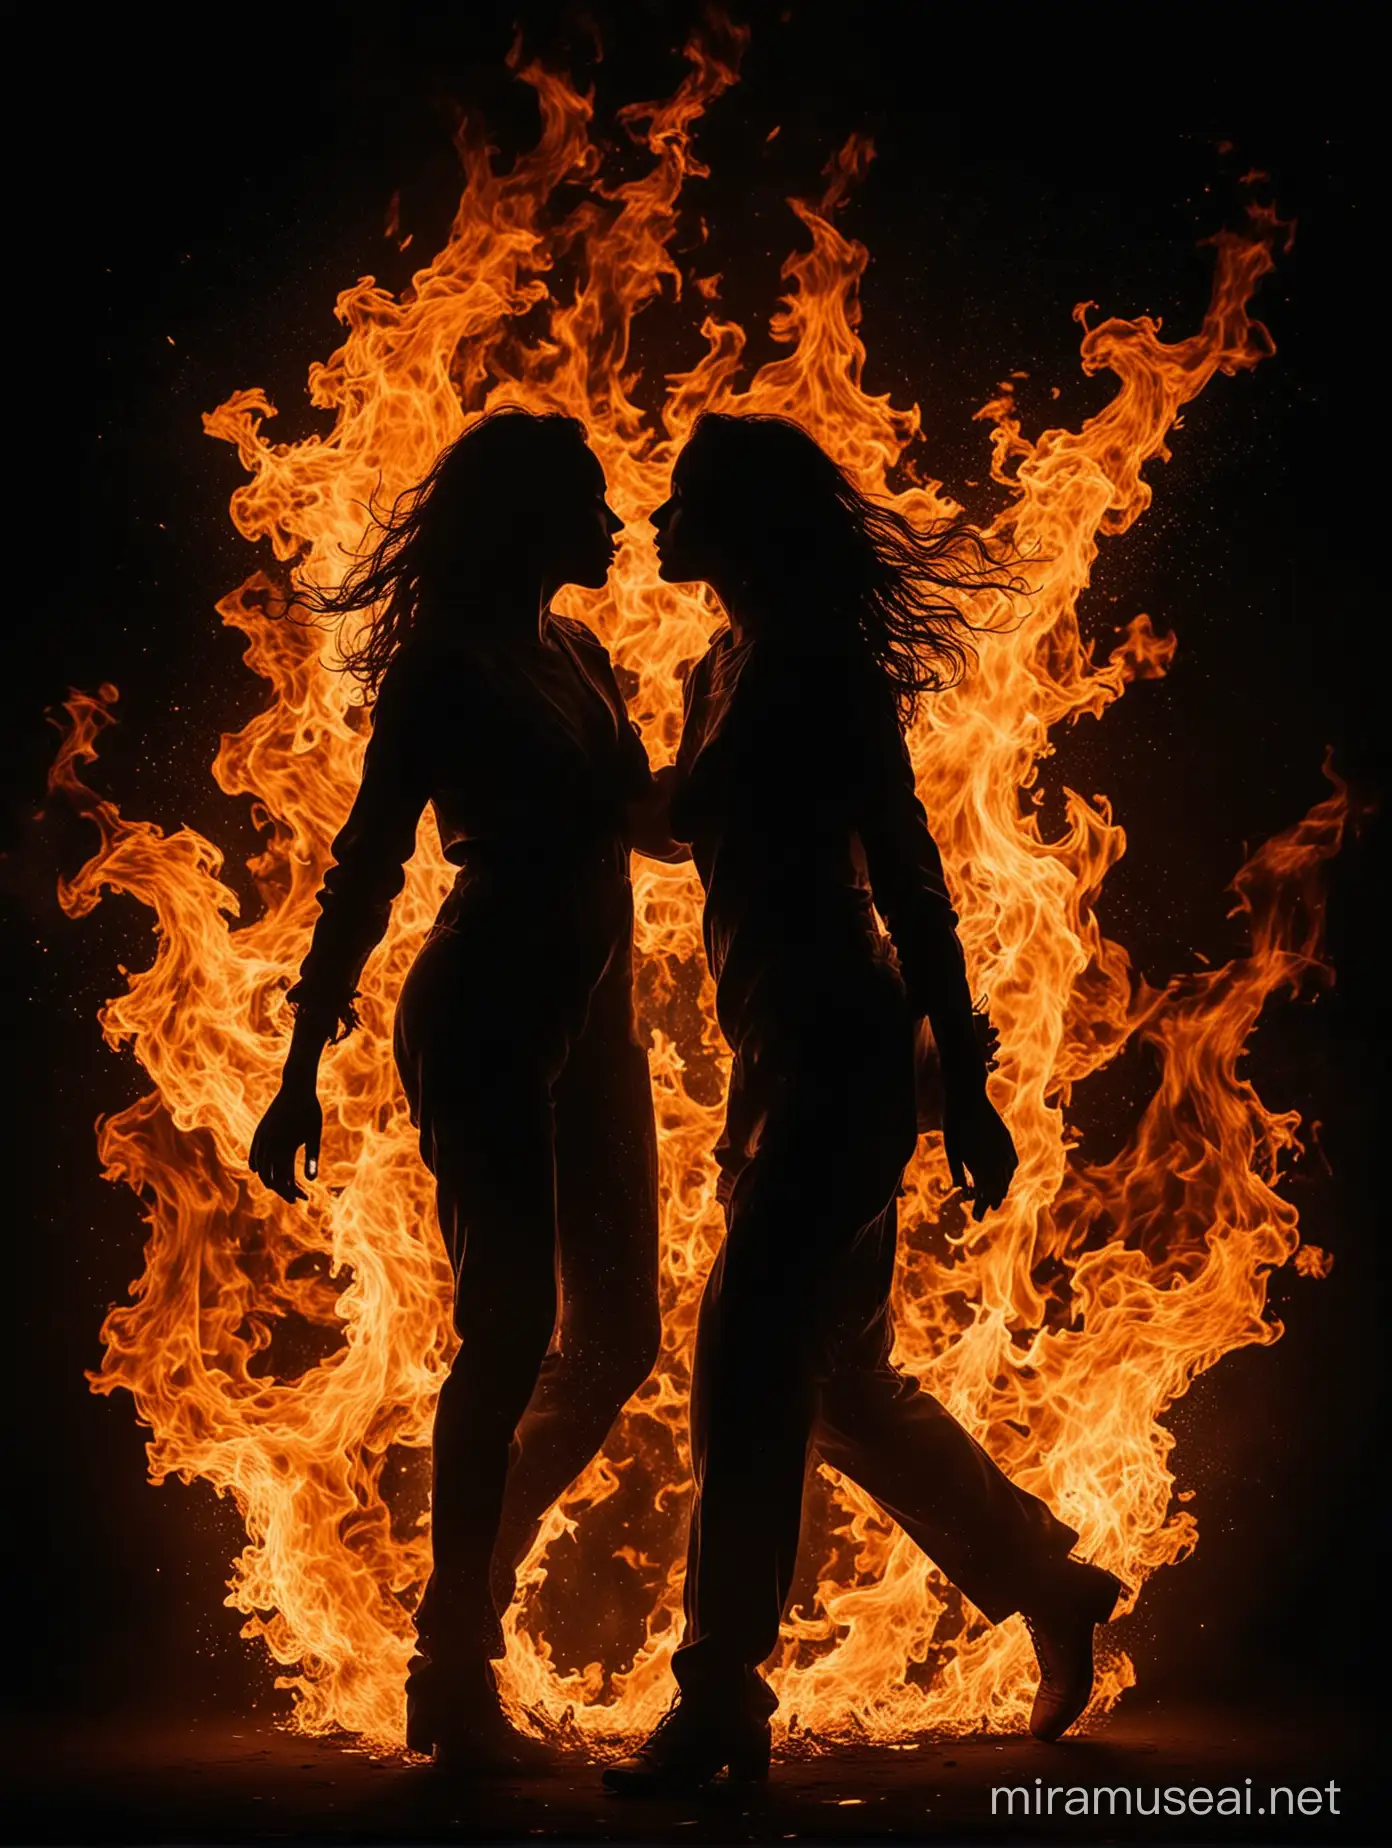 Dynamic Silhouette of Two Women Engulfed in Flames